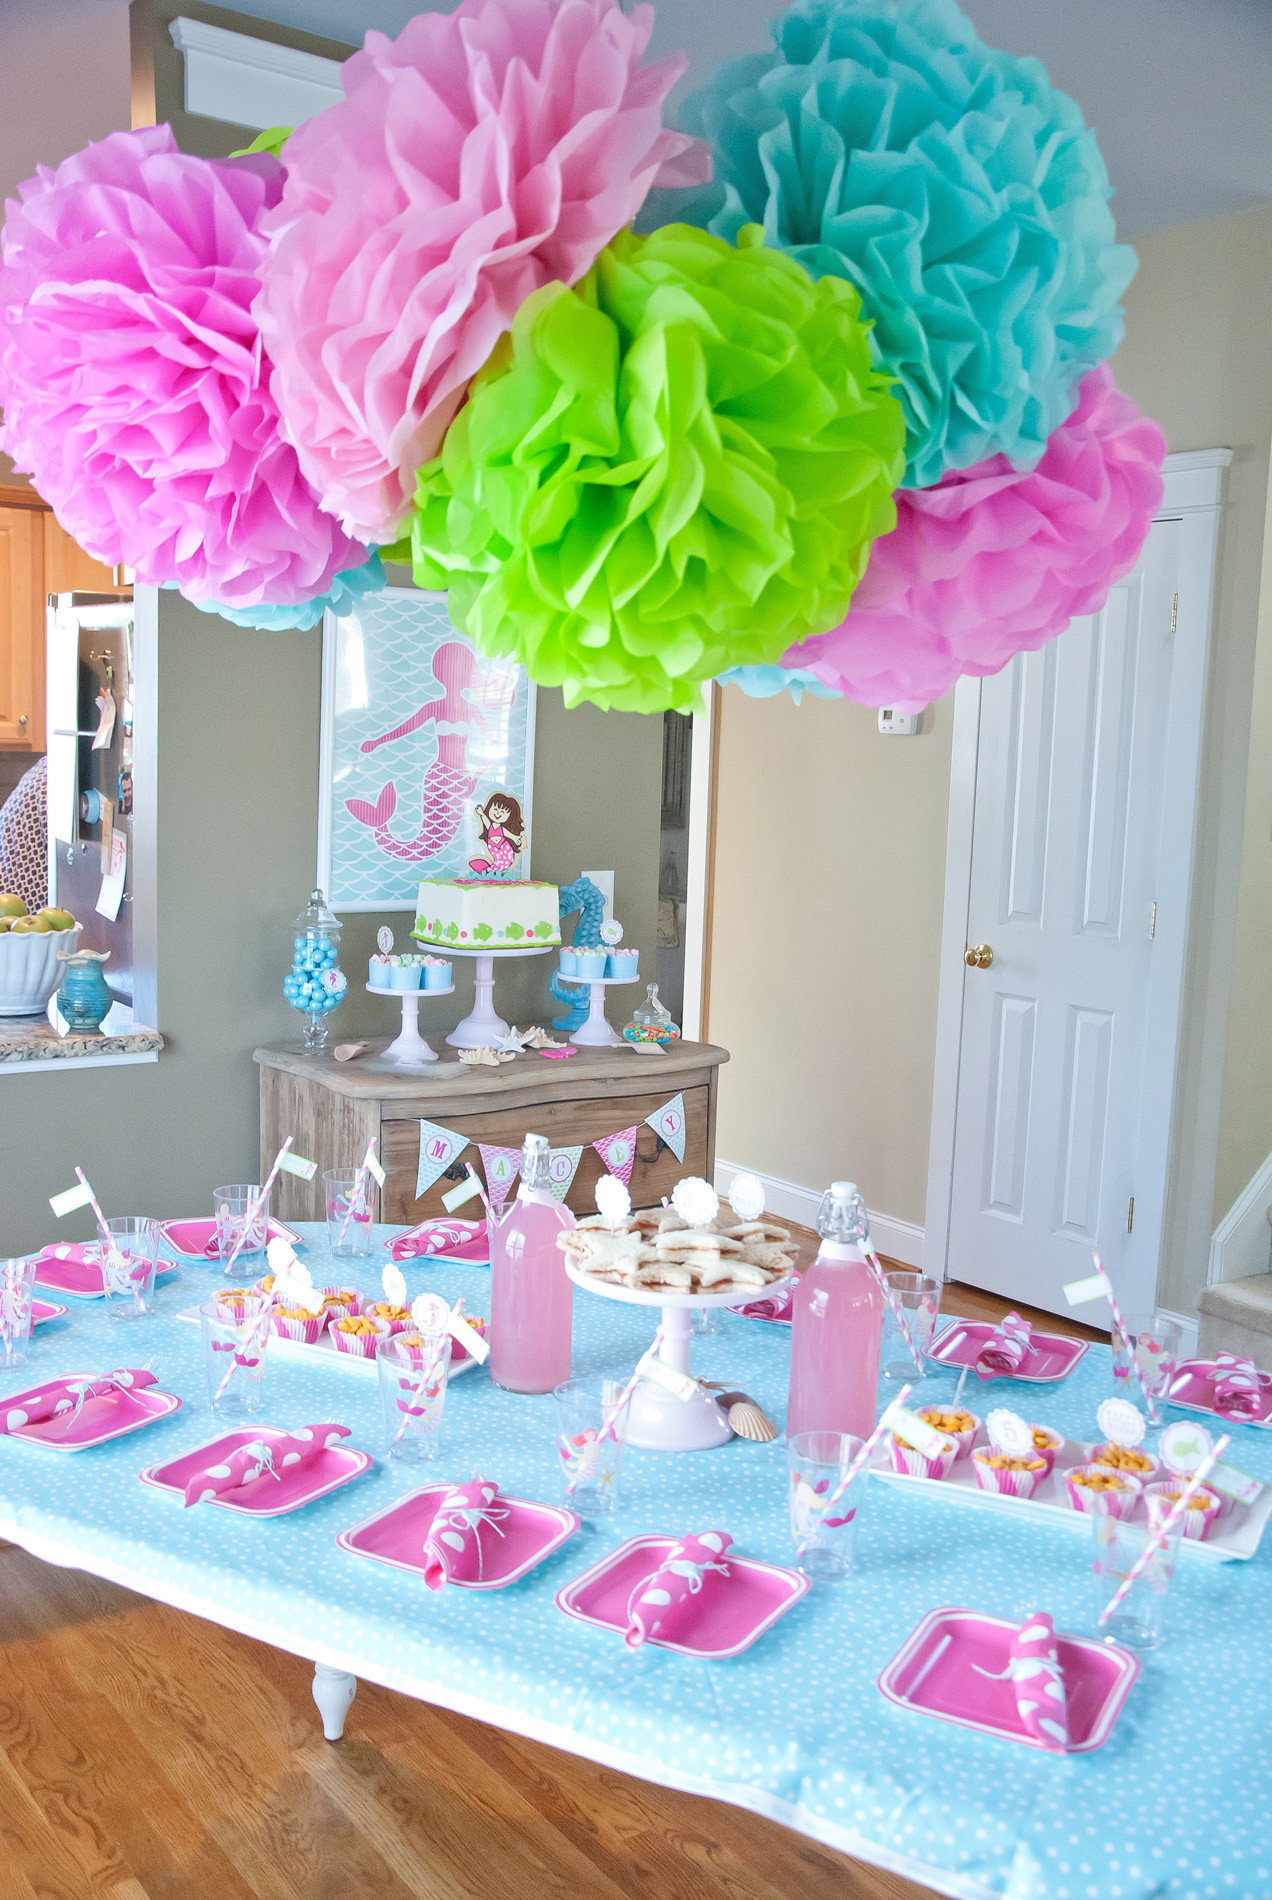 Birthday Party Table Decorations
 A Dreamy Mermaid Birthday Party Anders Ruff Custom